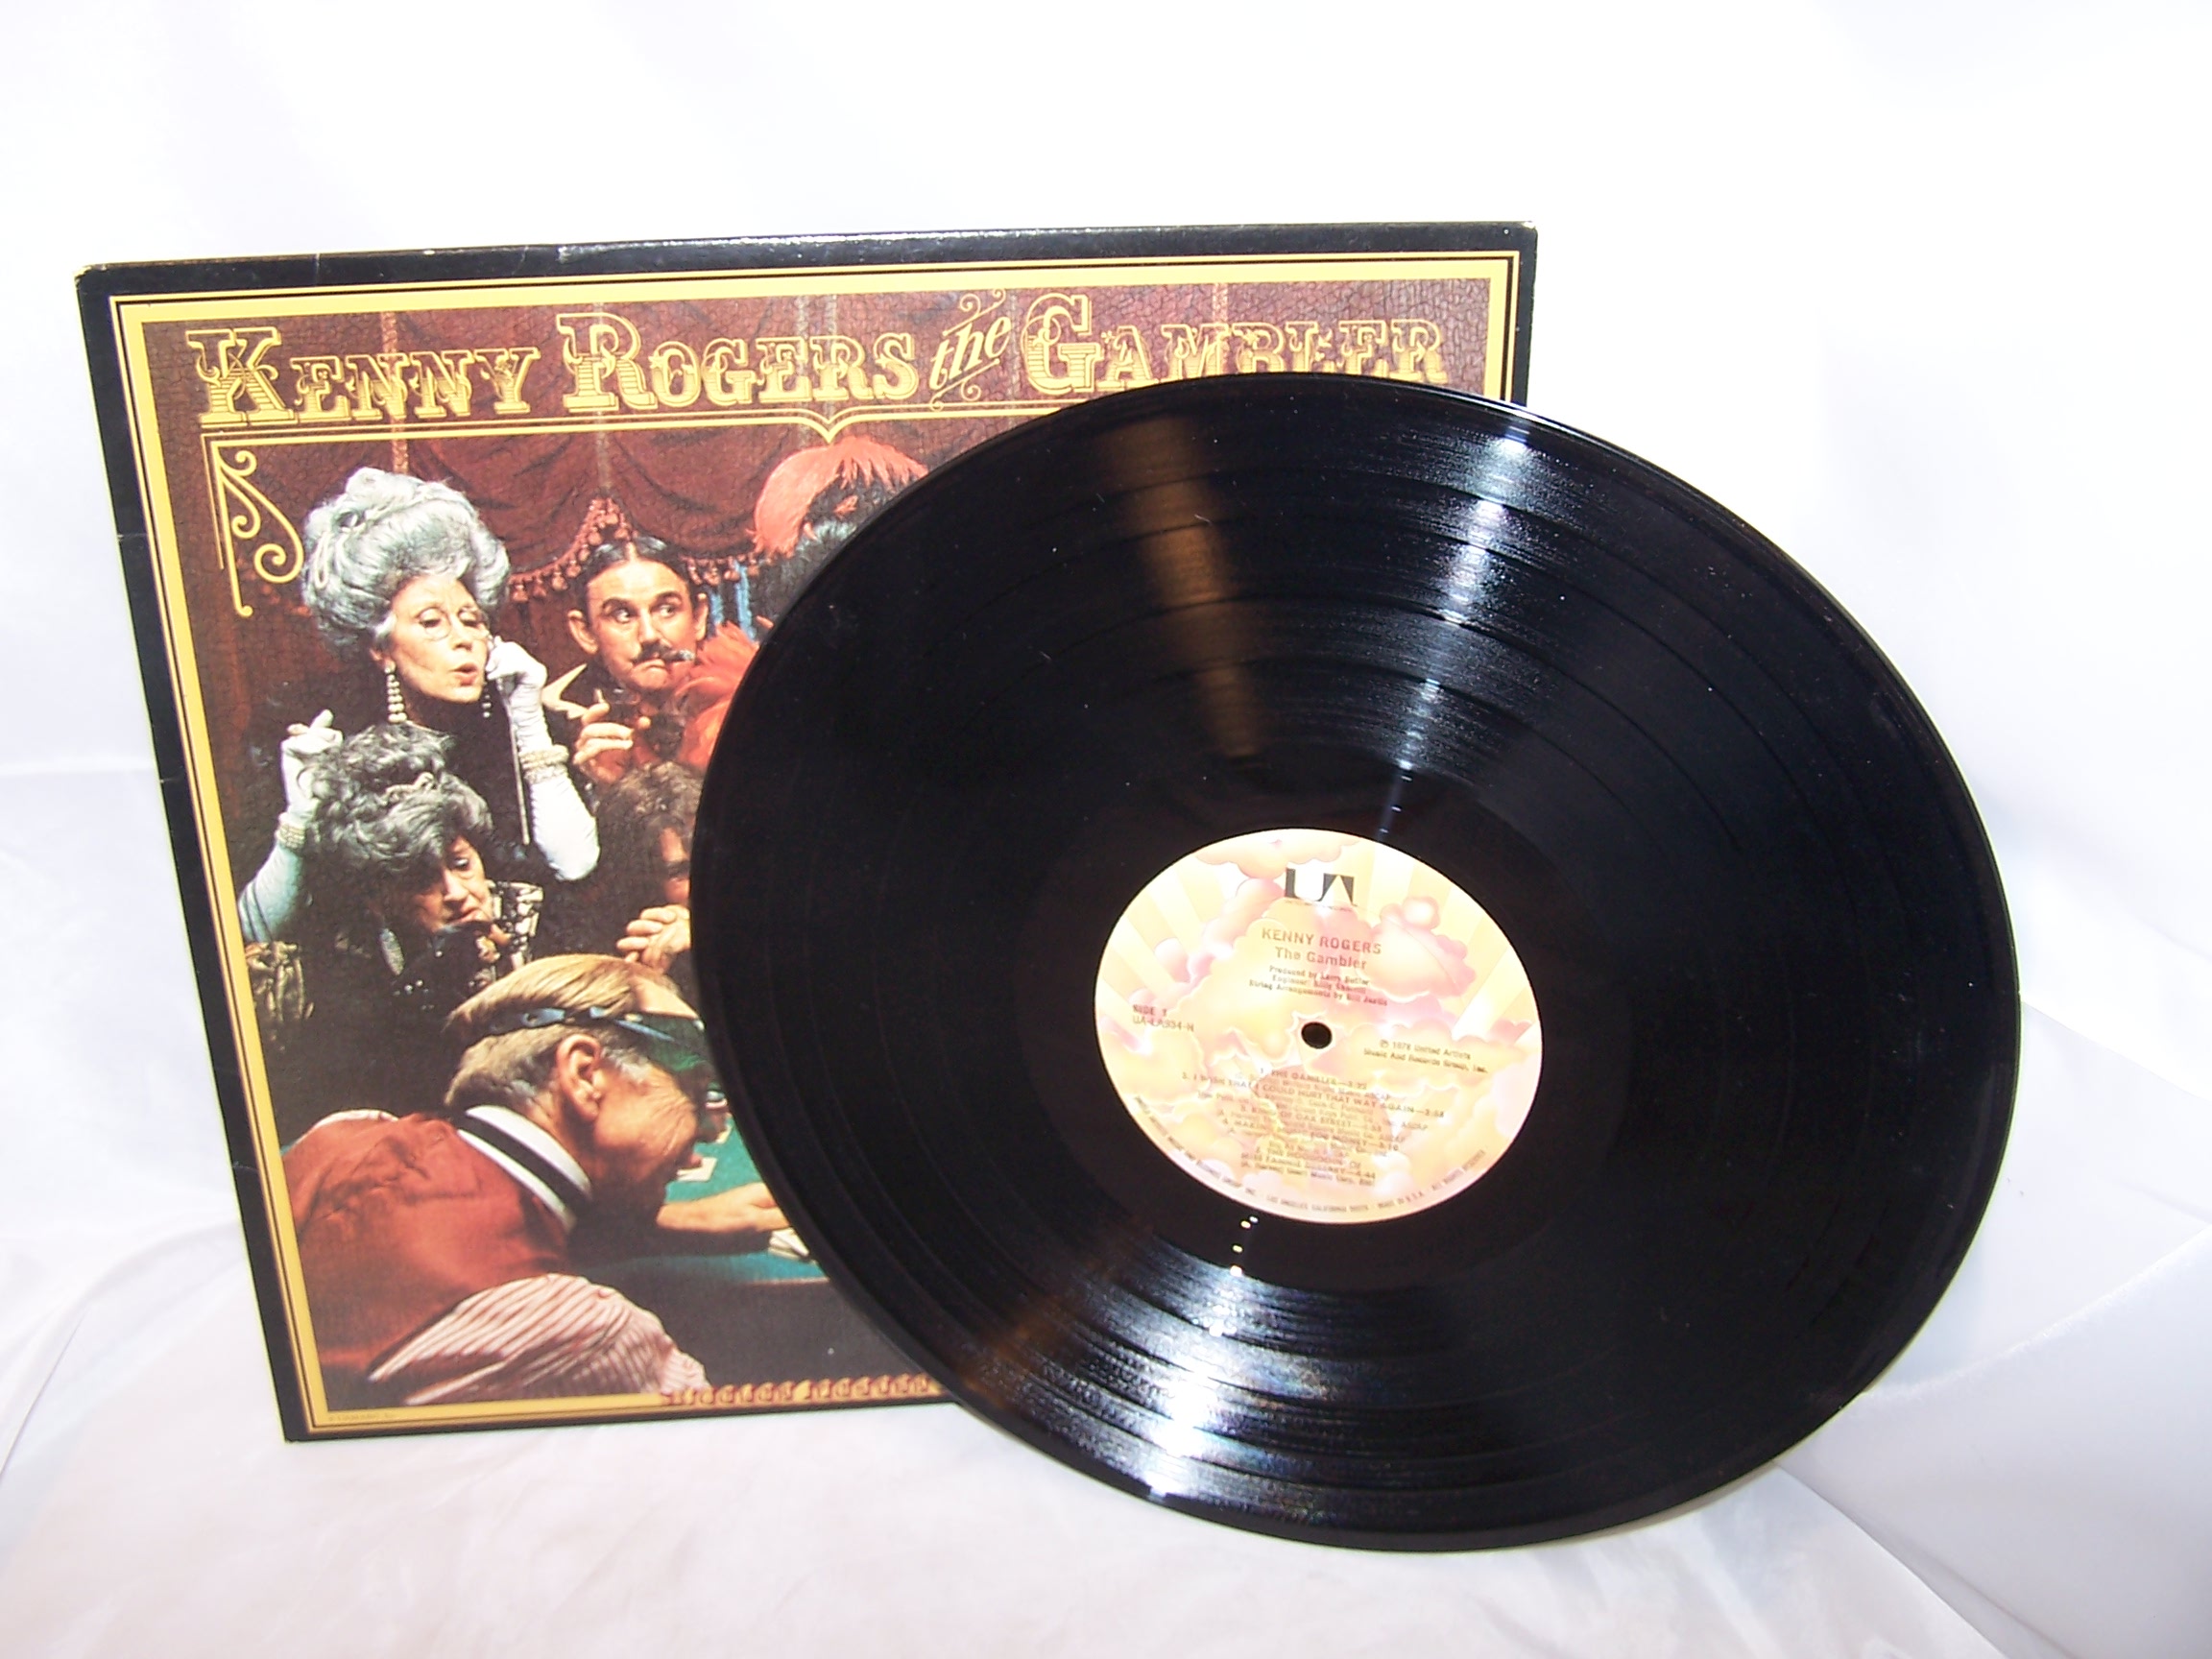 Image 2 of Kenny Rogers The Gambler Record Album, Poster, 1978